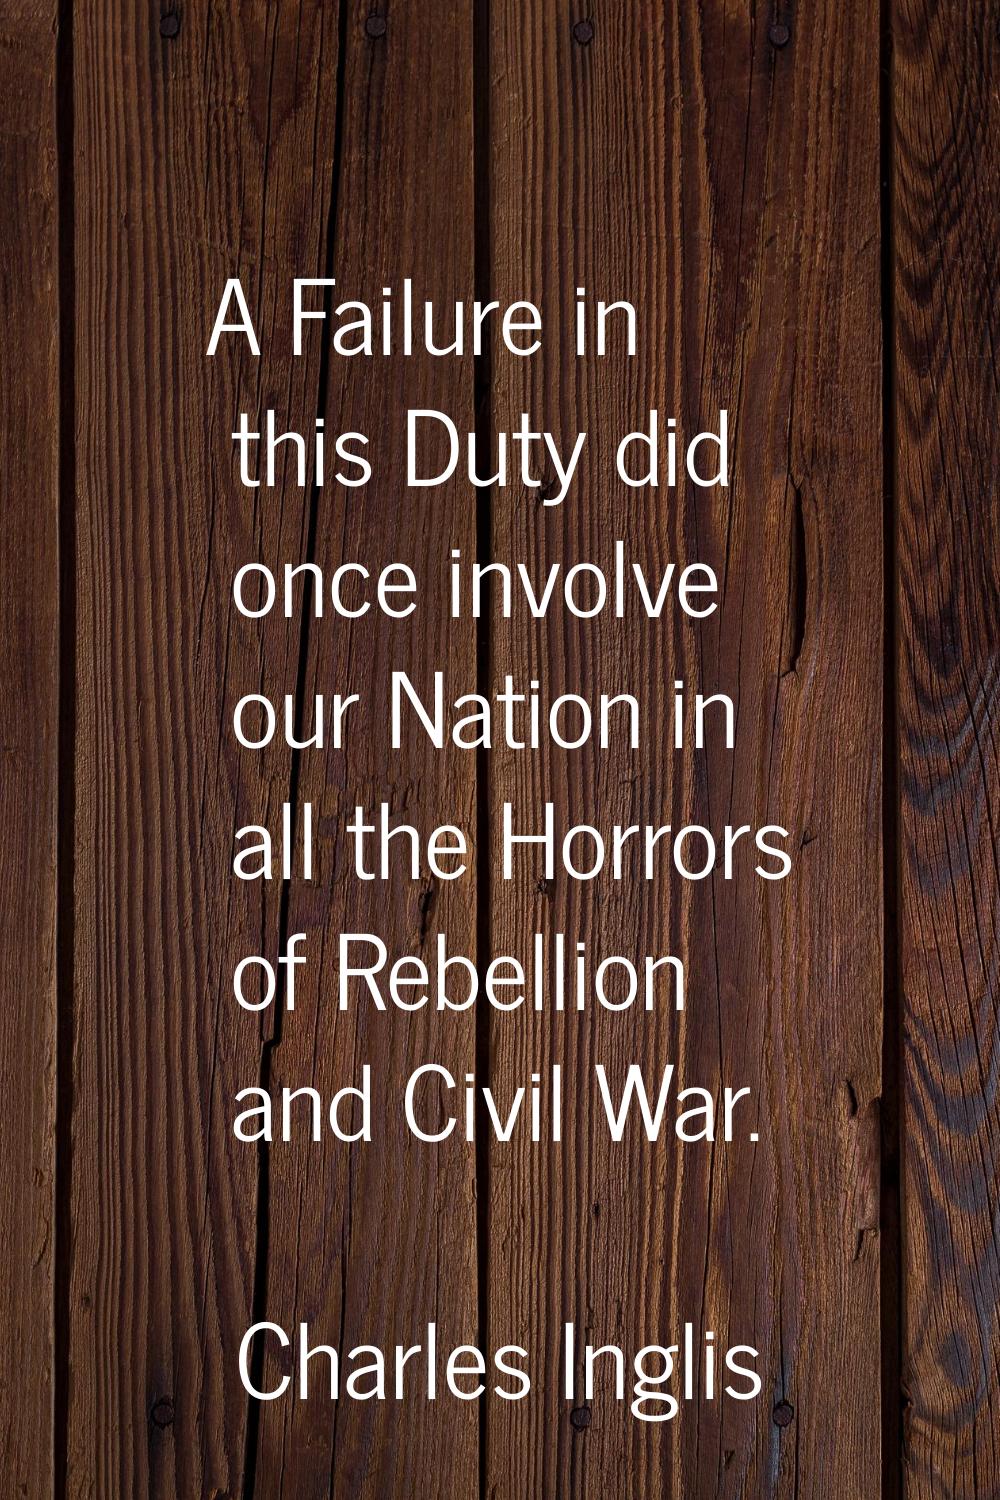 A Failure in this Duty did once involve our Nation in all the Horrors of Rebellion and Civil War.